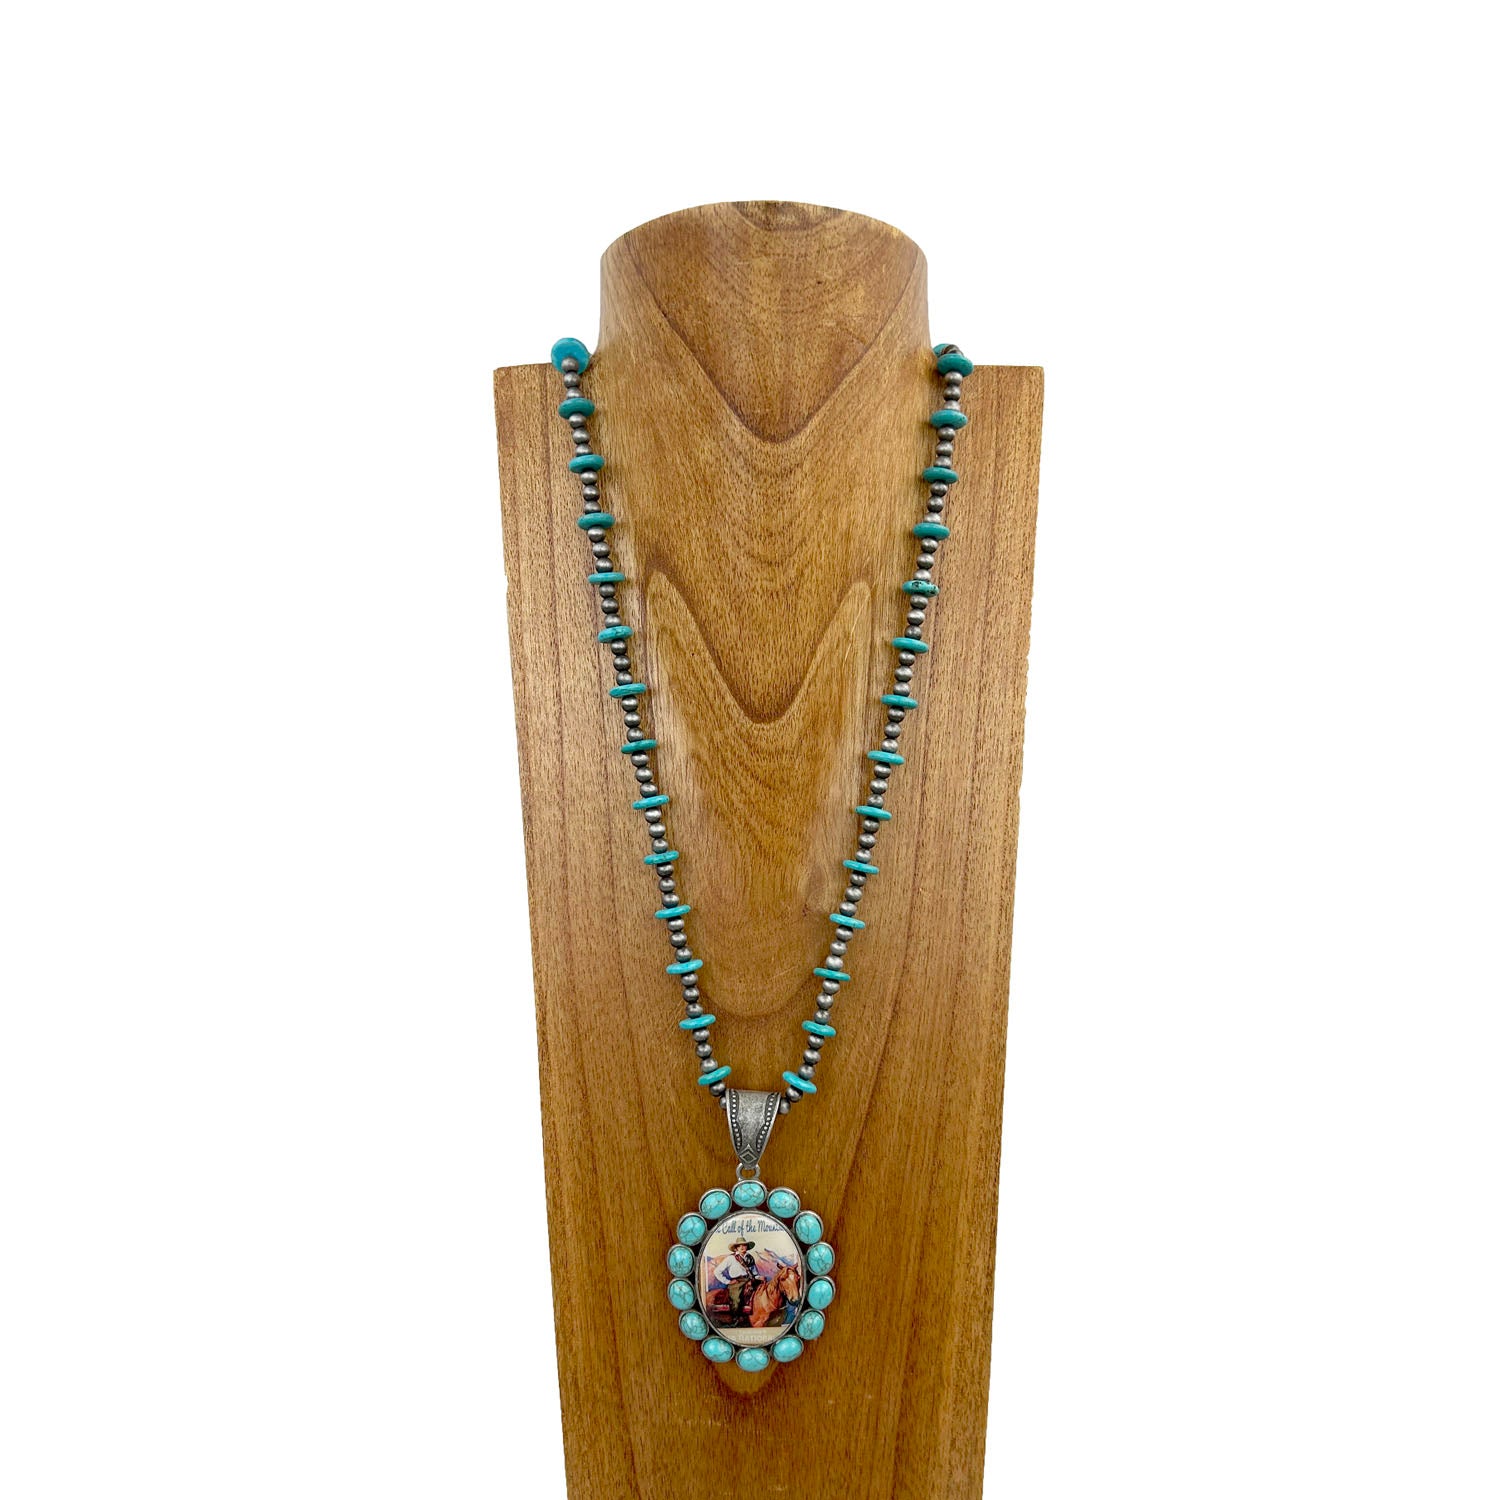 NKS230708-20	" 33 Inches long blue turquoise roundel stone and silver  Navajo pearl beads with blue turquoise stone oval  cowgirl pendant Necklace"